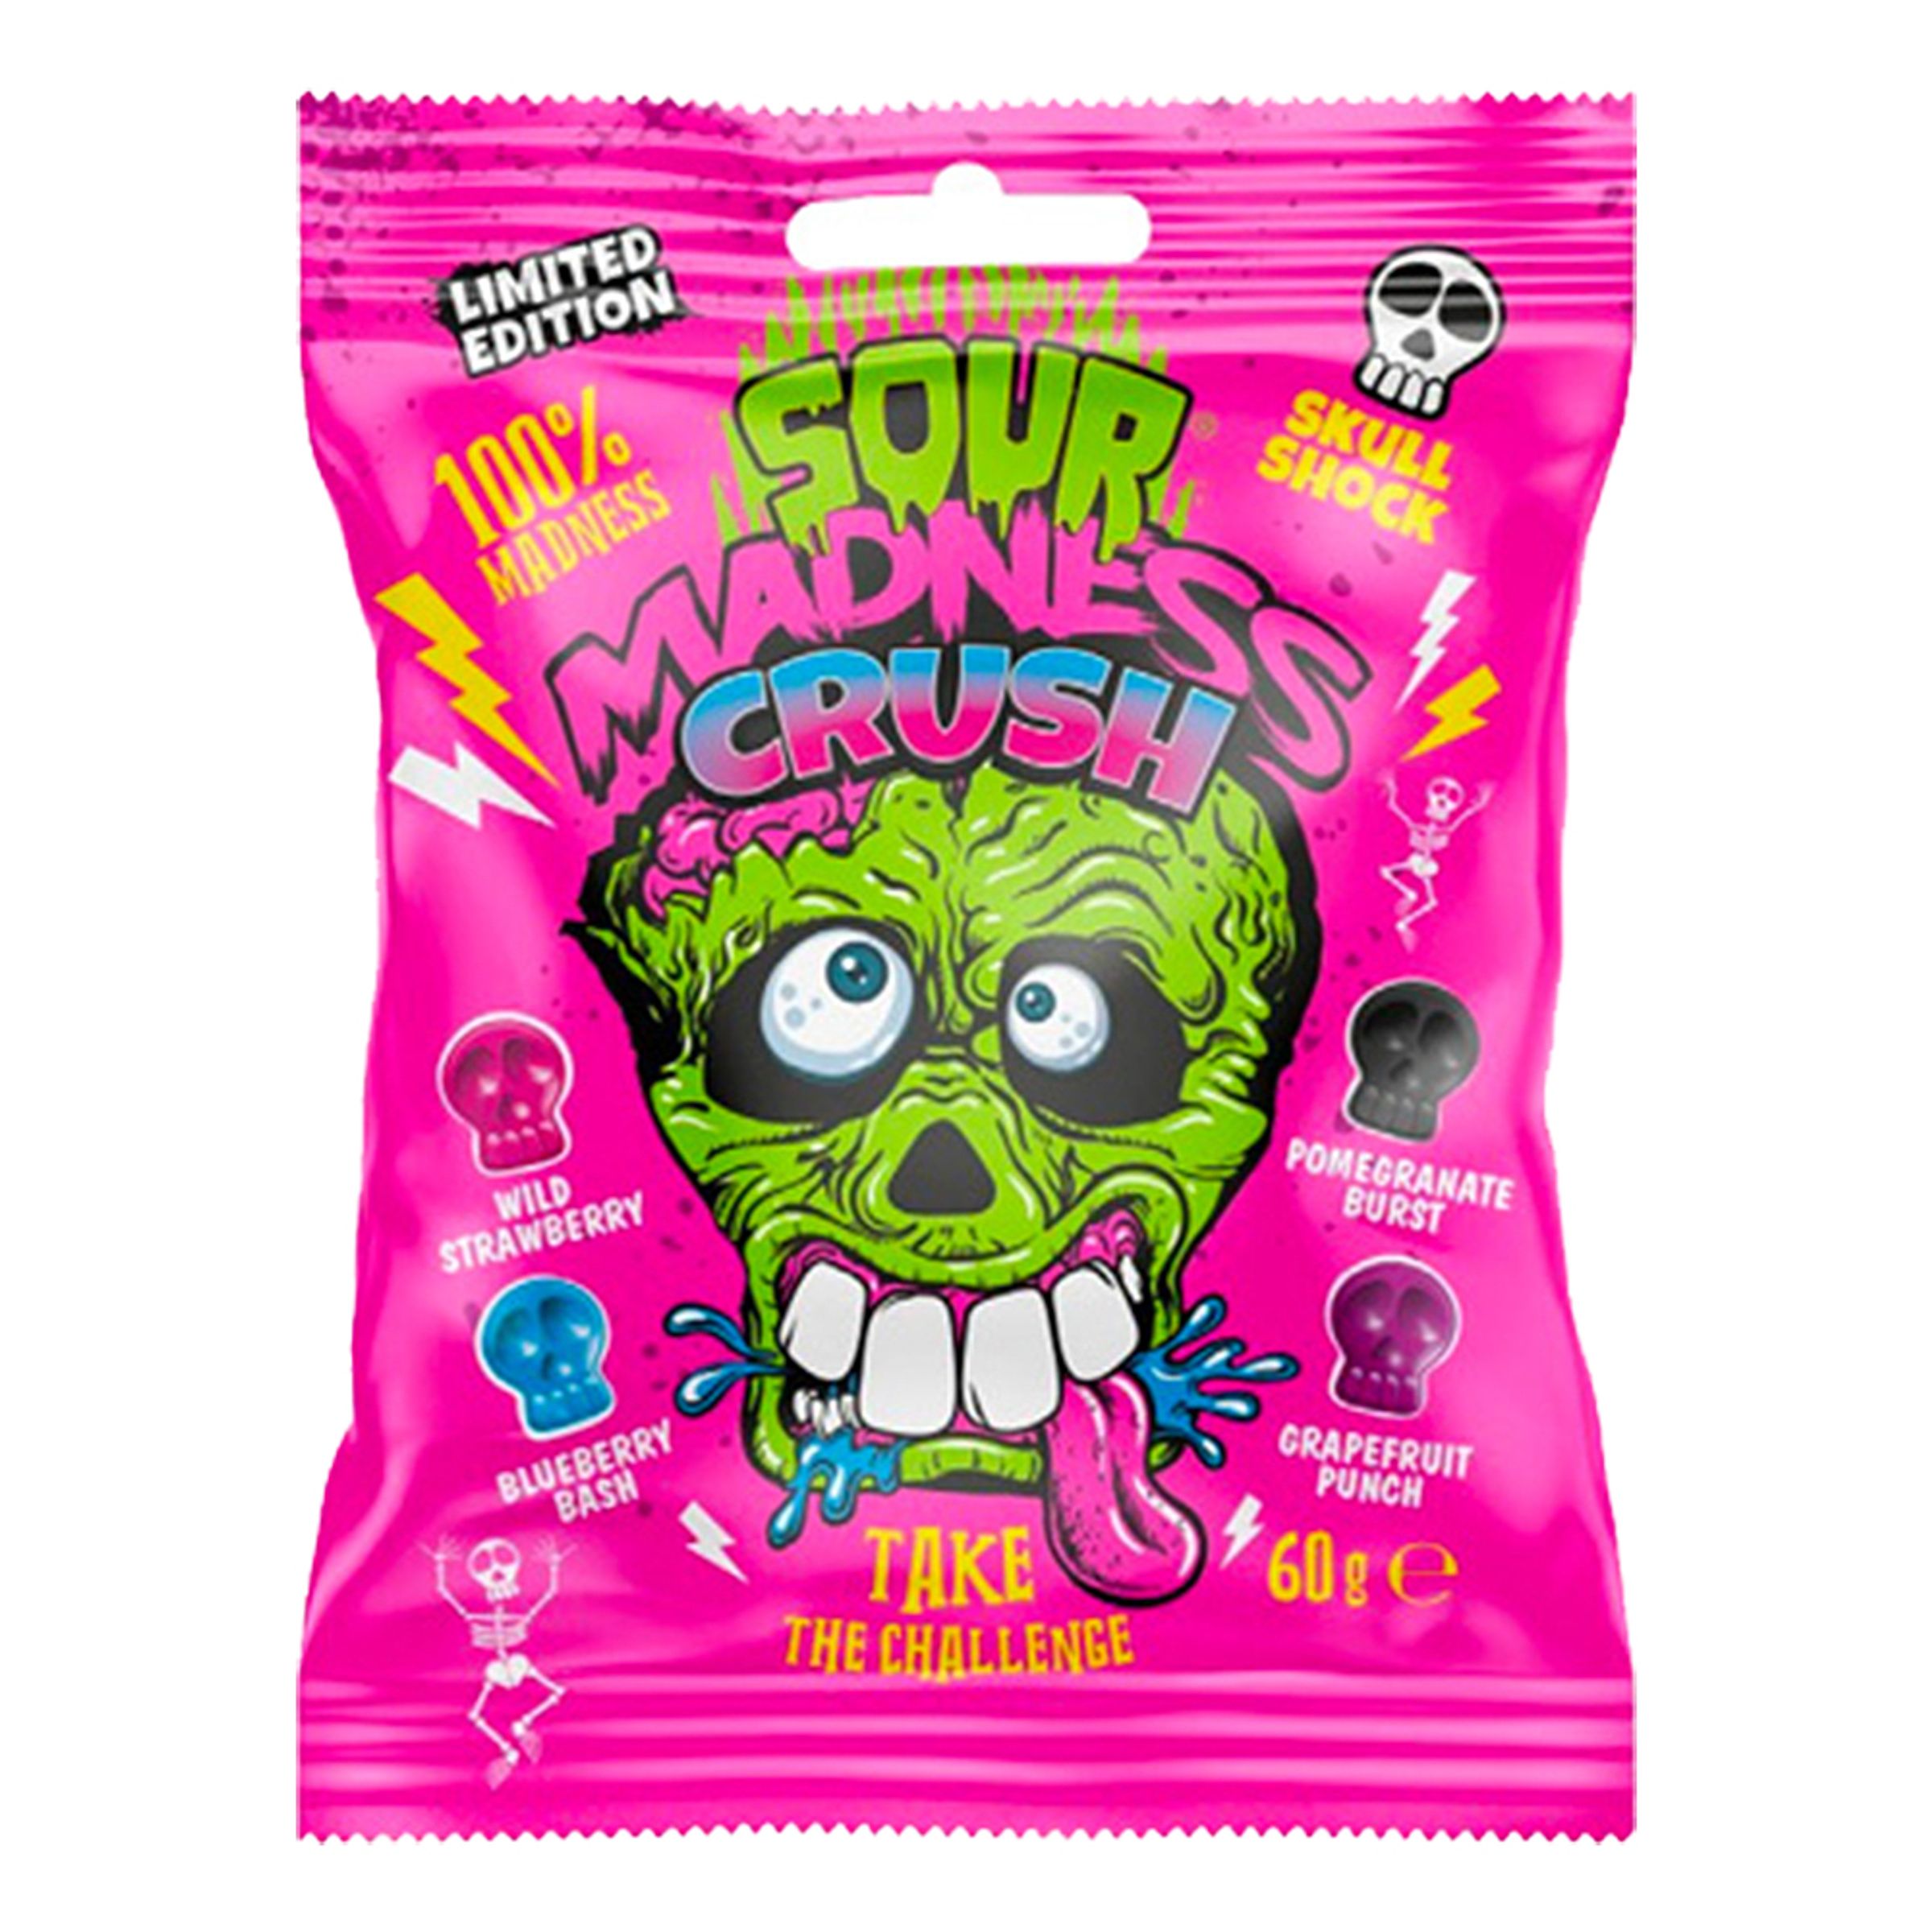 Sour Madness Pink Crush - 60 gram